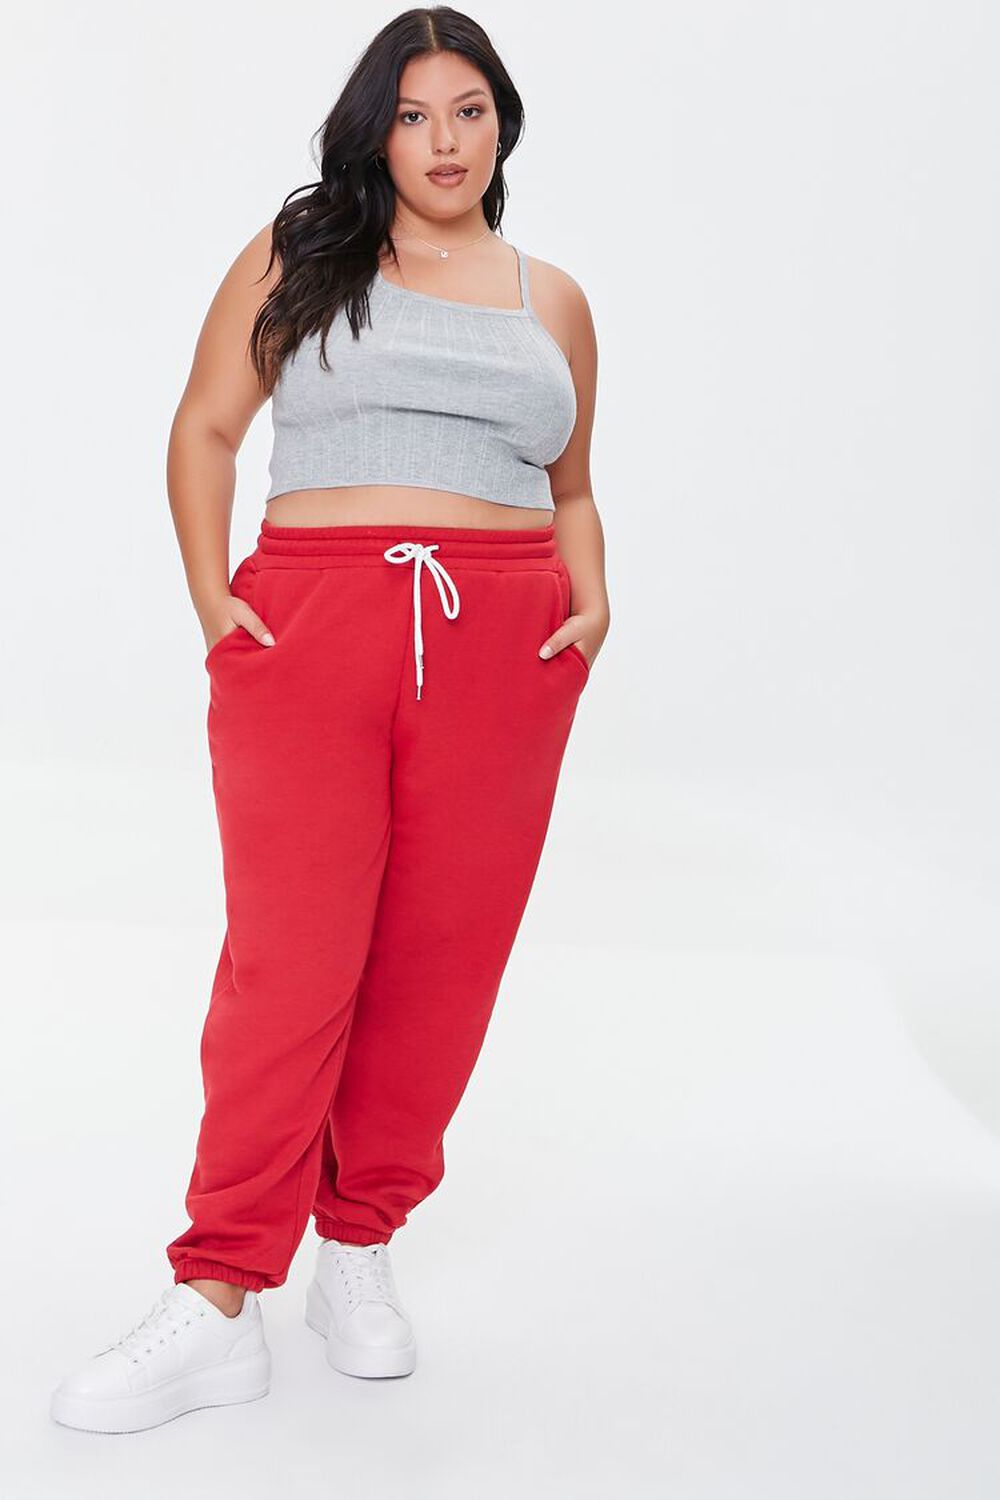 RASBERRY Plus Size French Terry Joggers, image 1